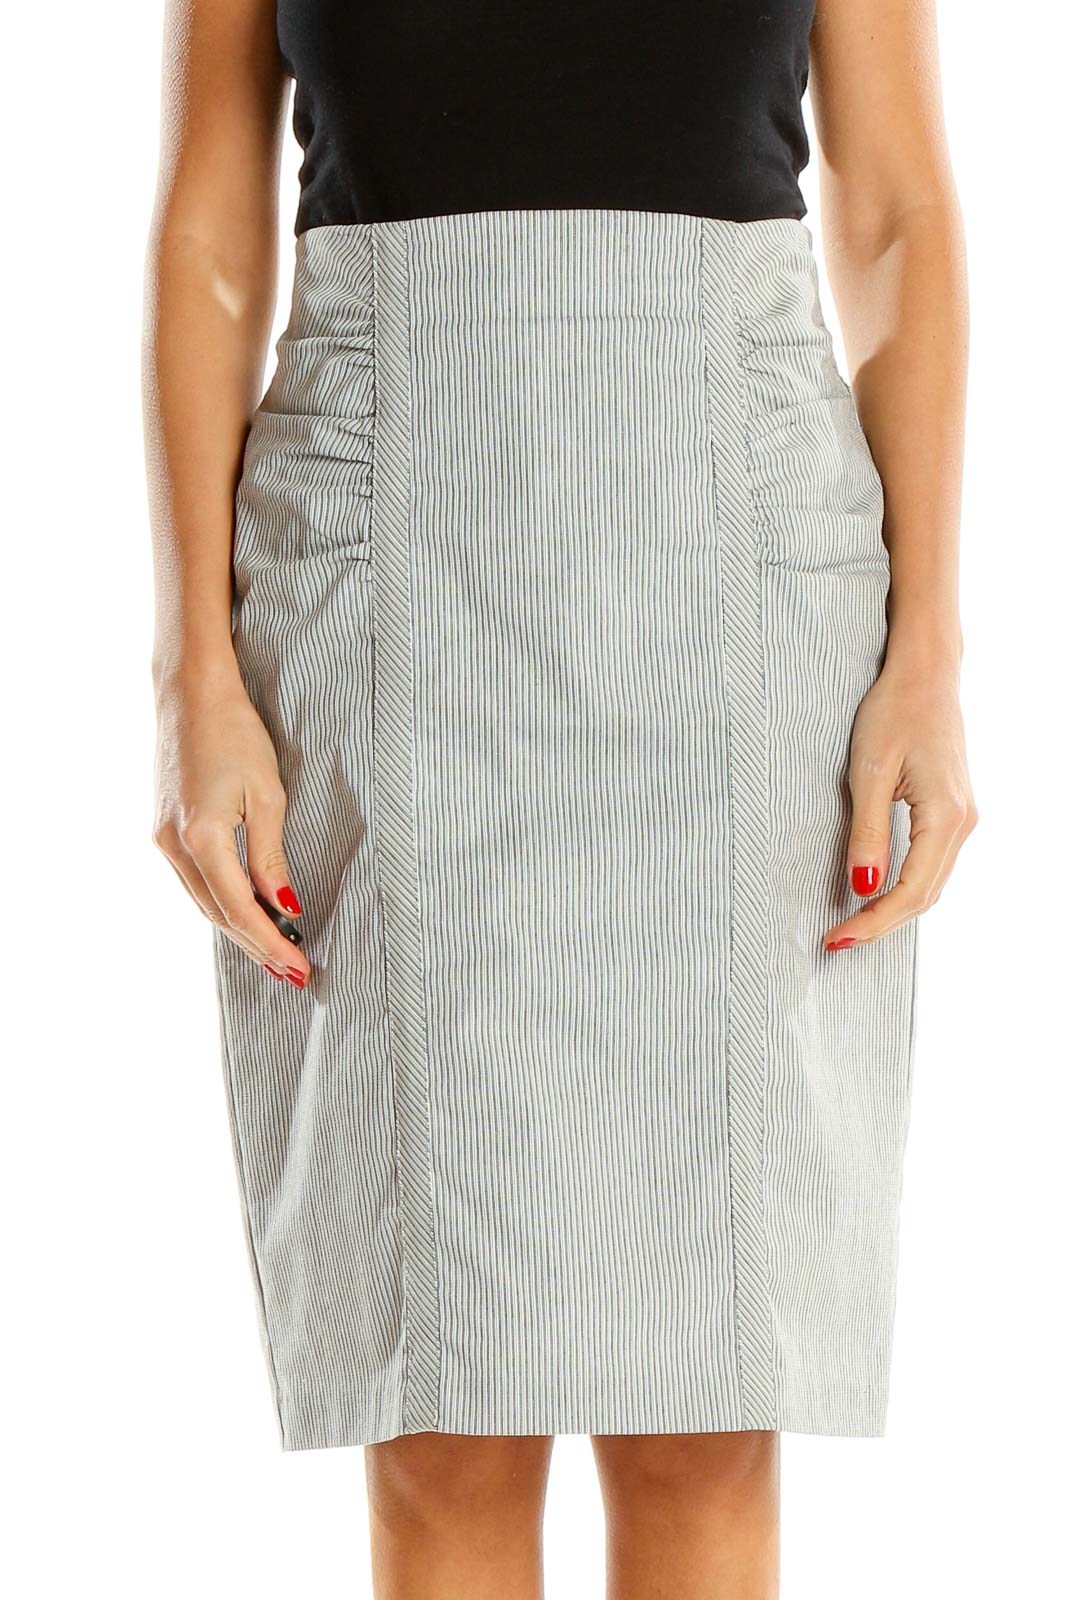 Gray Chic Pin Stripe Pencil Skirt Front